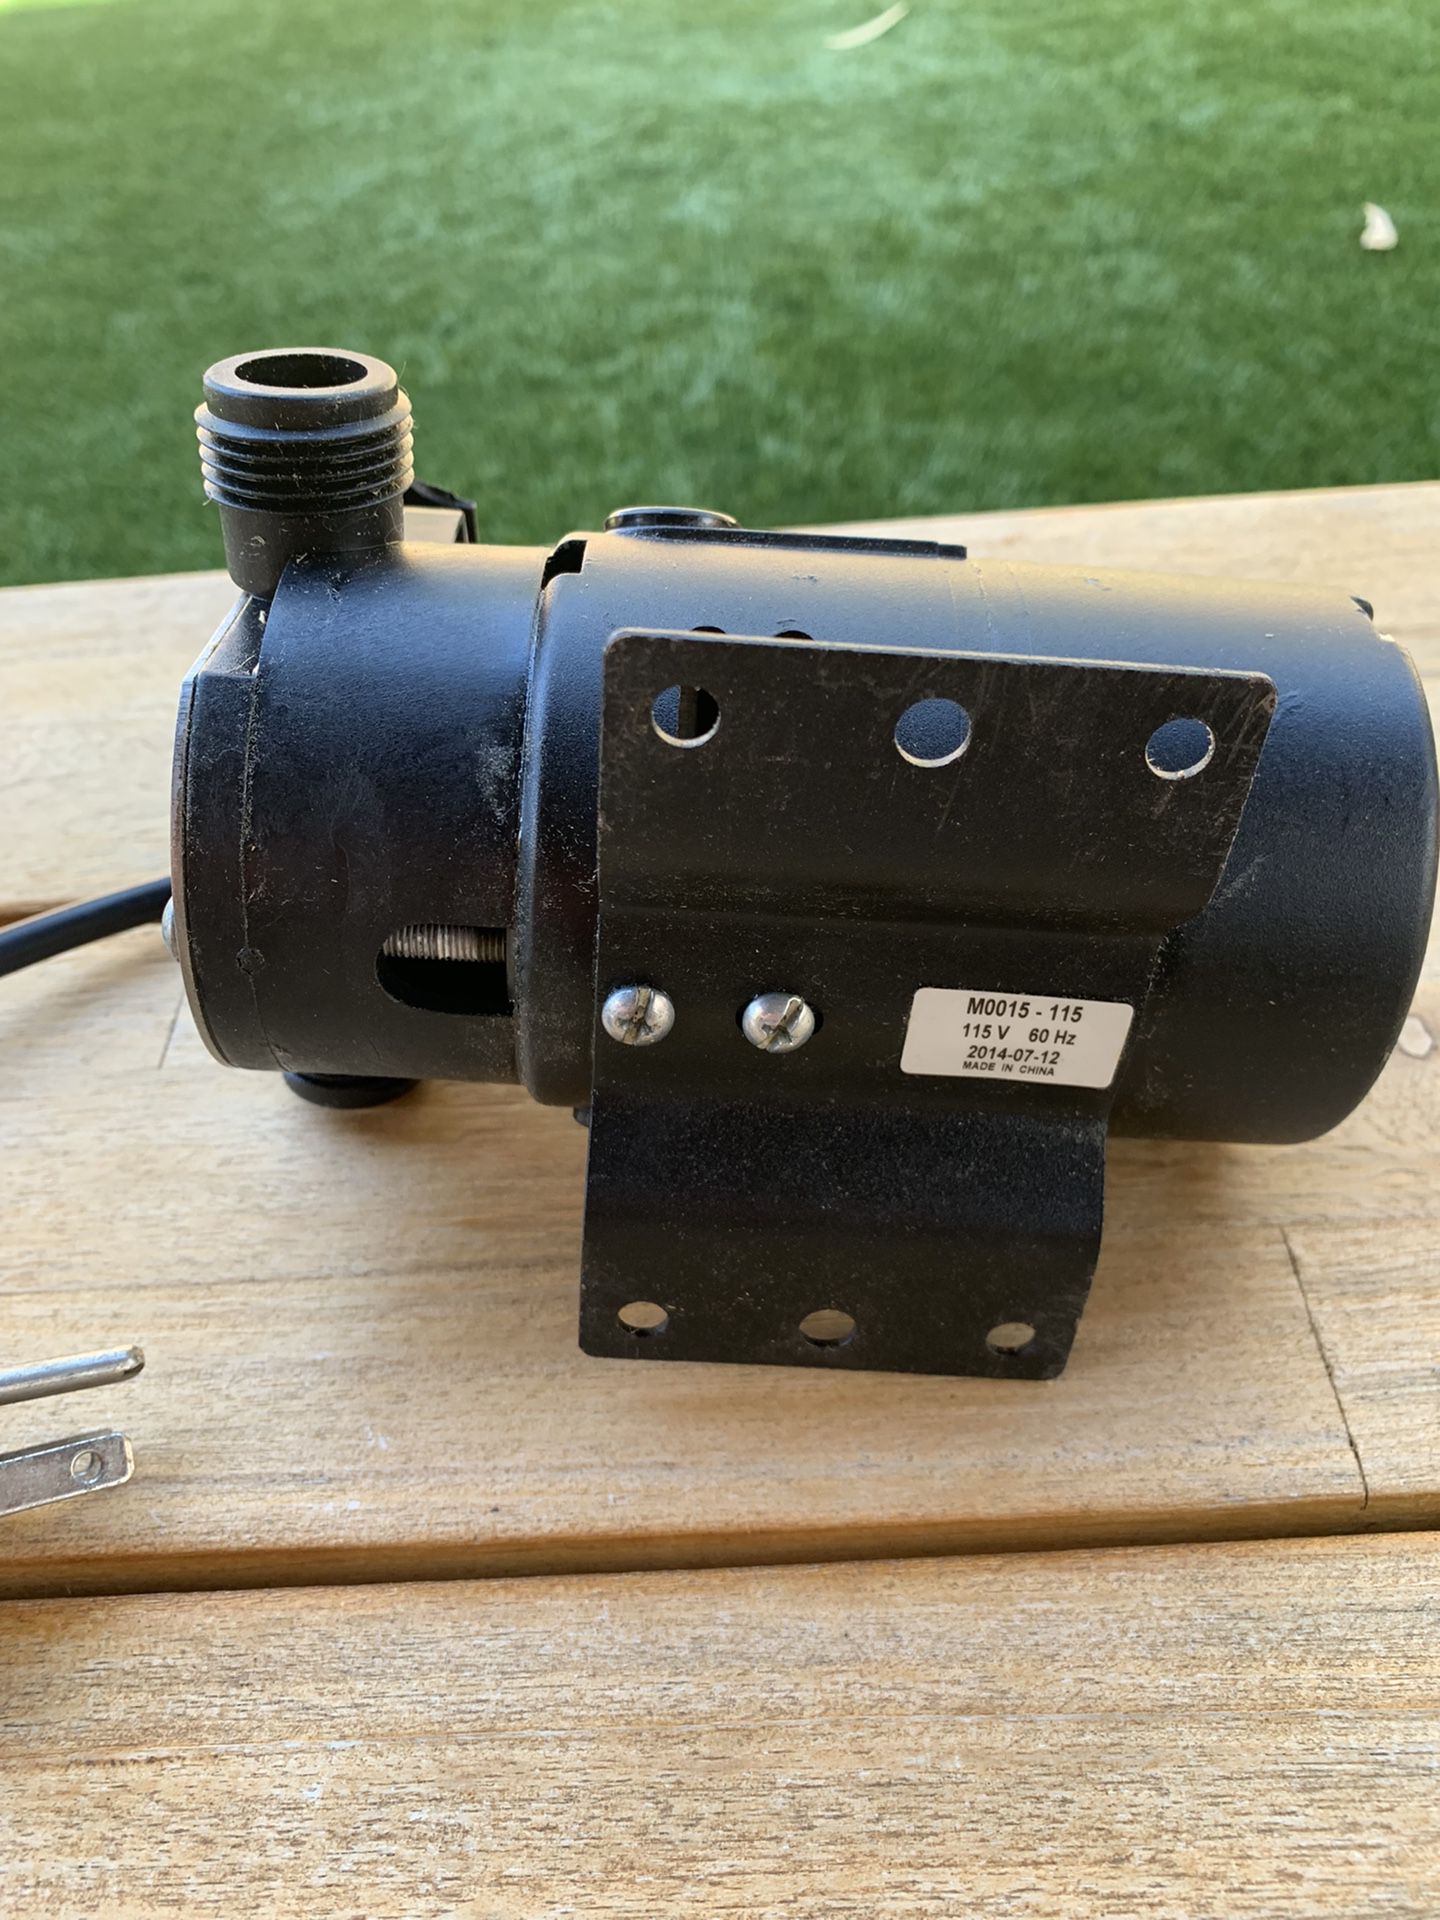 Pump For Fountain Or Pool